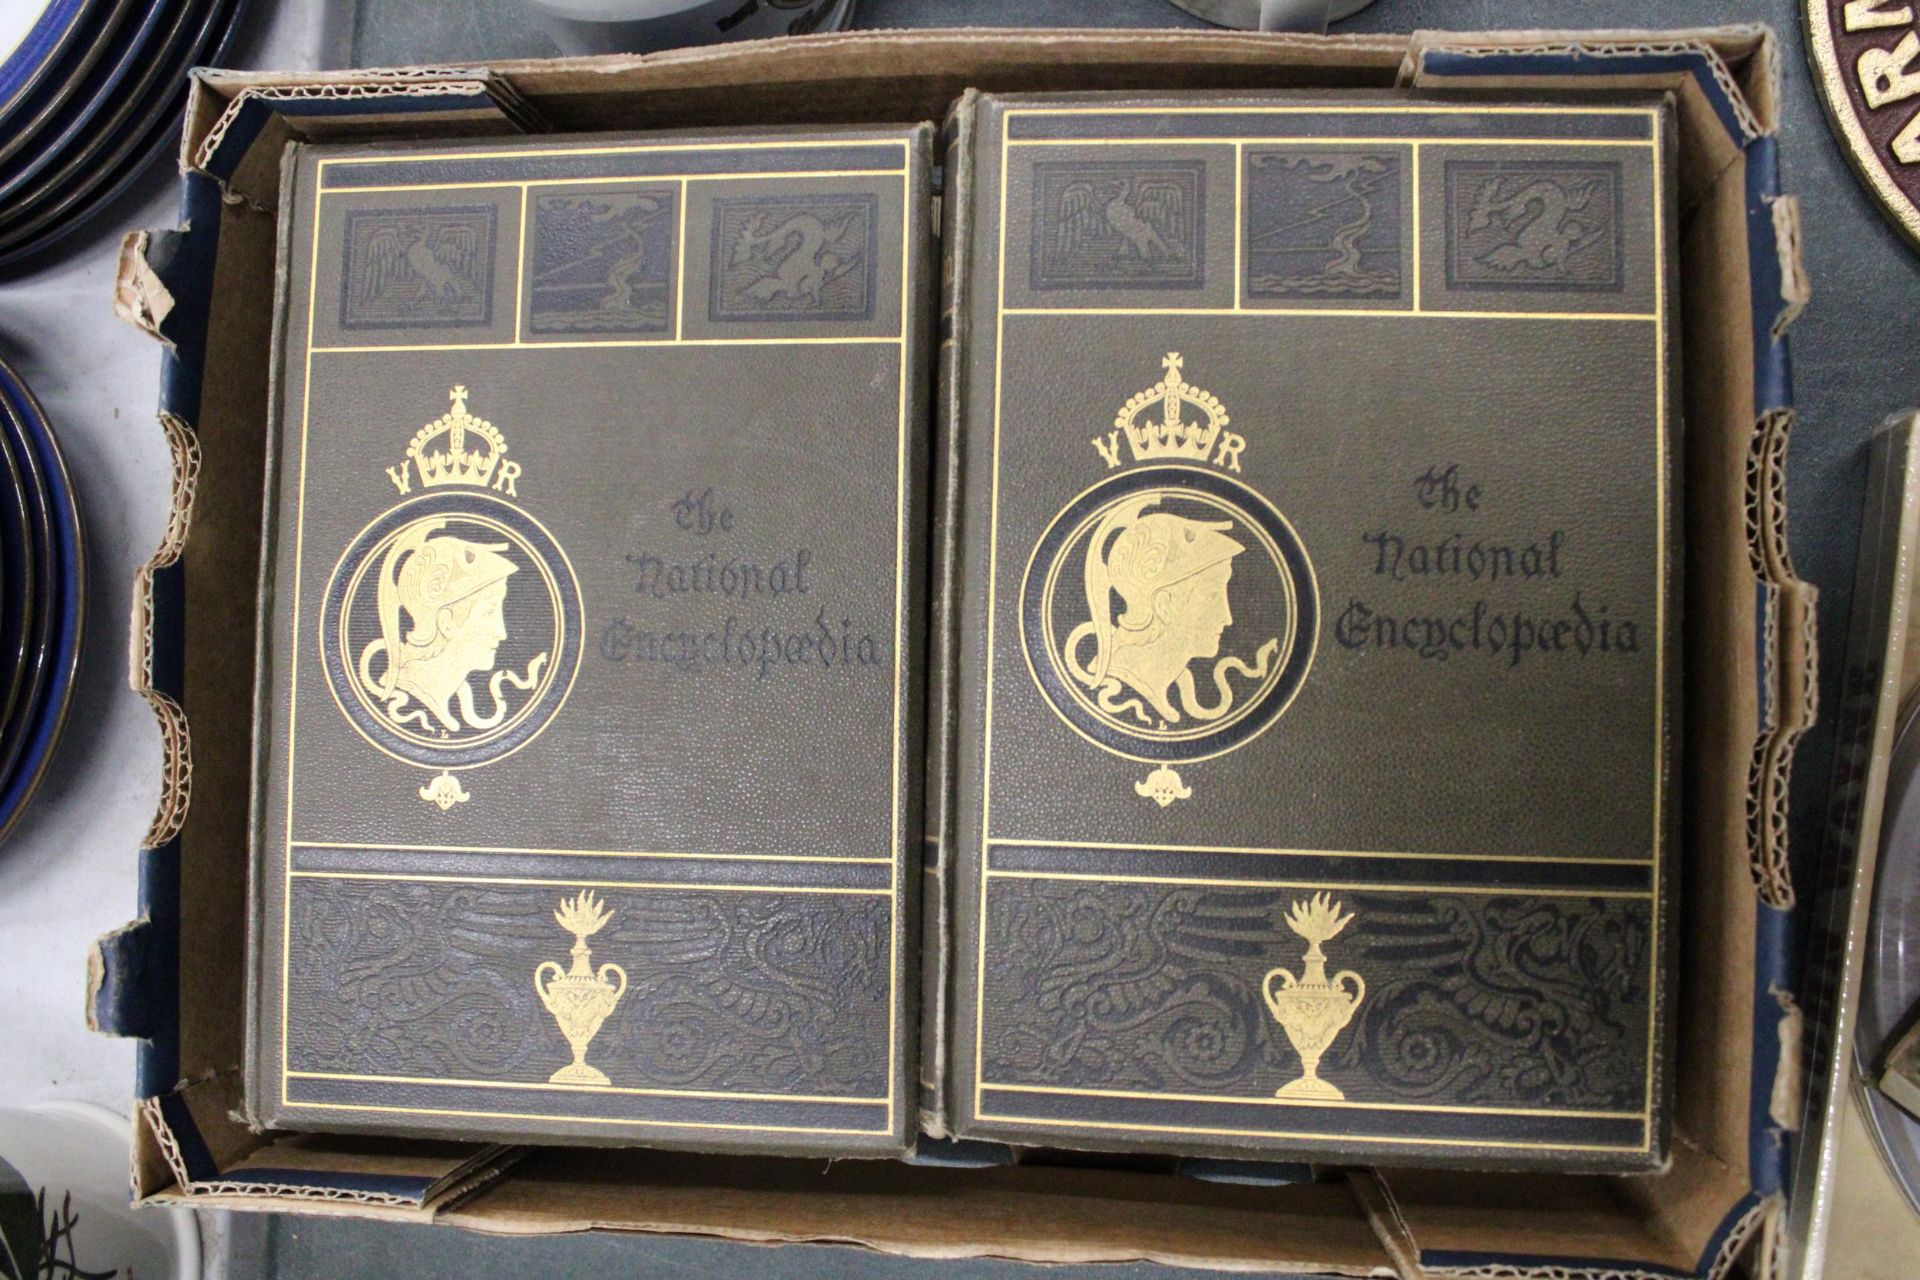 FIVE VOLUMES OF 'THE NATIONAL ENCYCLOPEDIA' - Image 4 of 5